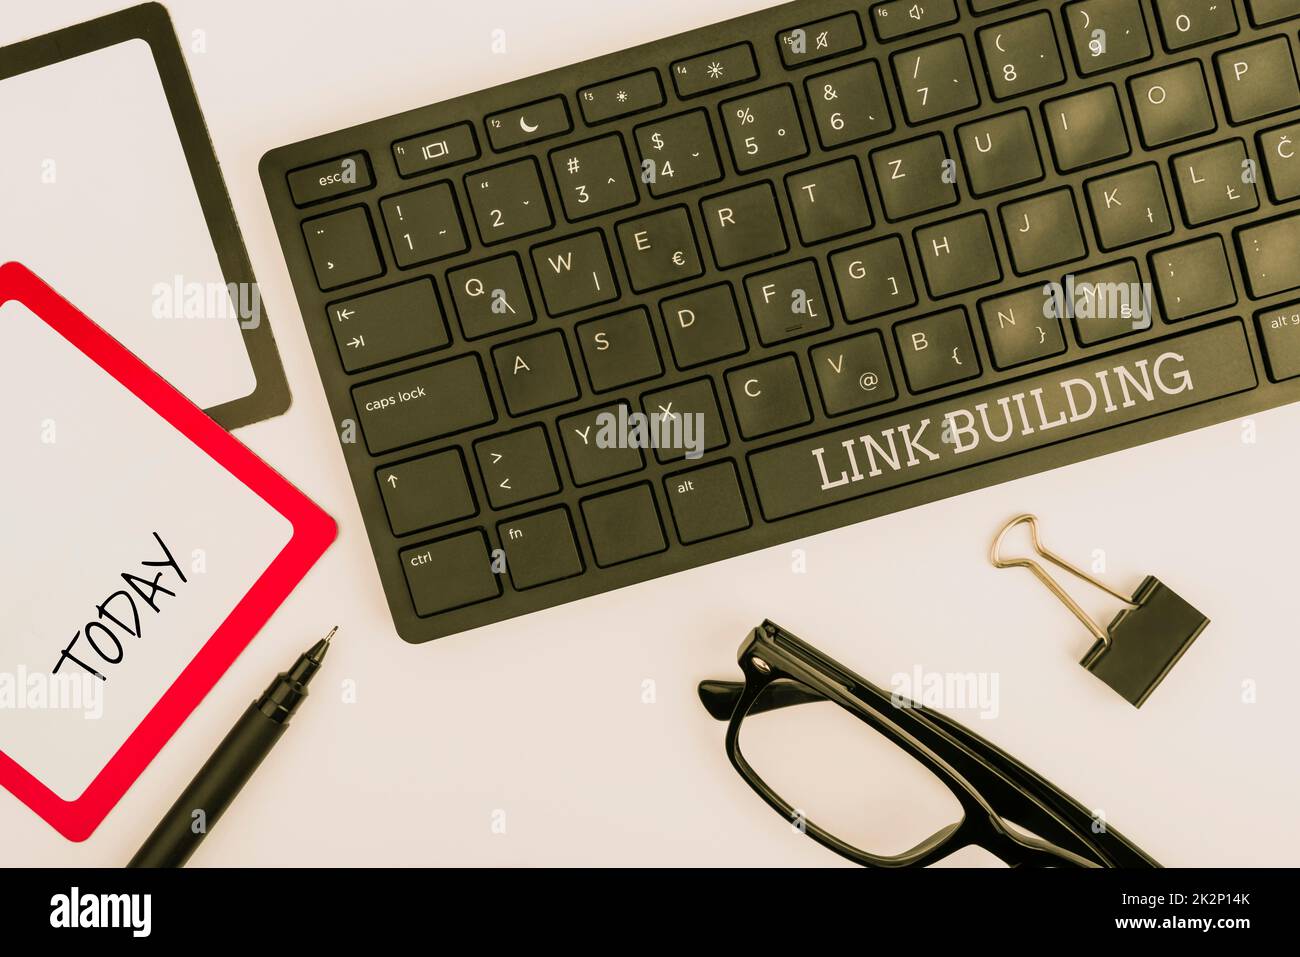 Text caption presenting Link Building. Business overview SEO Term Exchange Links Acquire Hyperlinks Indexed Computer Keyboard And Symbol.Information Medium For Communication. Stock Photo